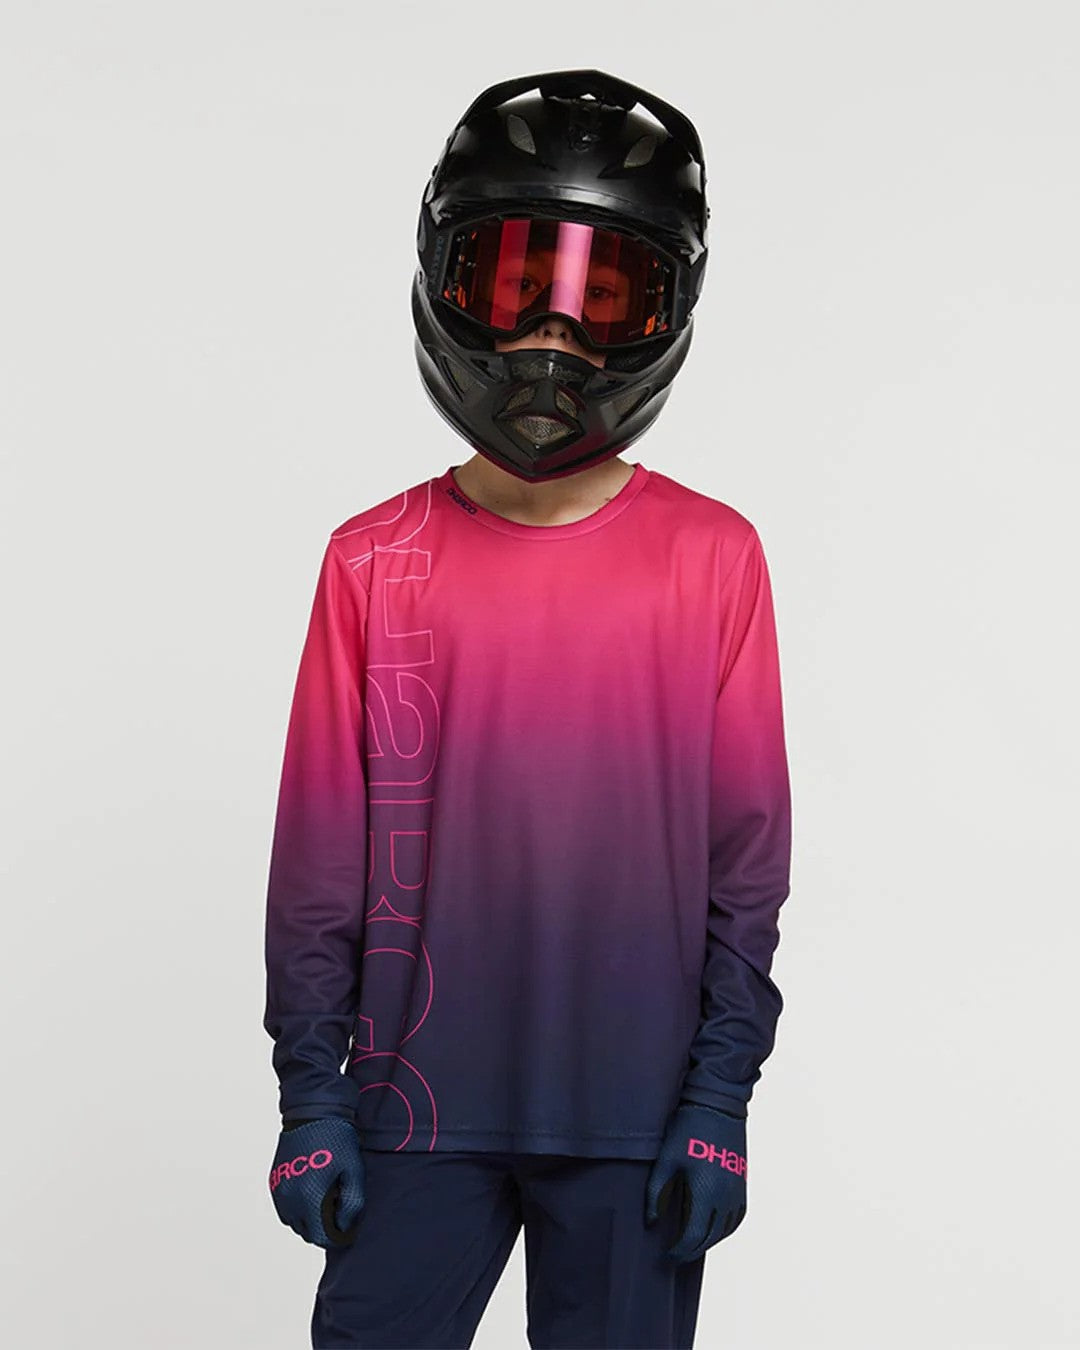 Jersey Dharco Fort Bill Gravity Youth (para Niño)